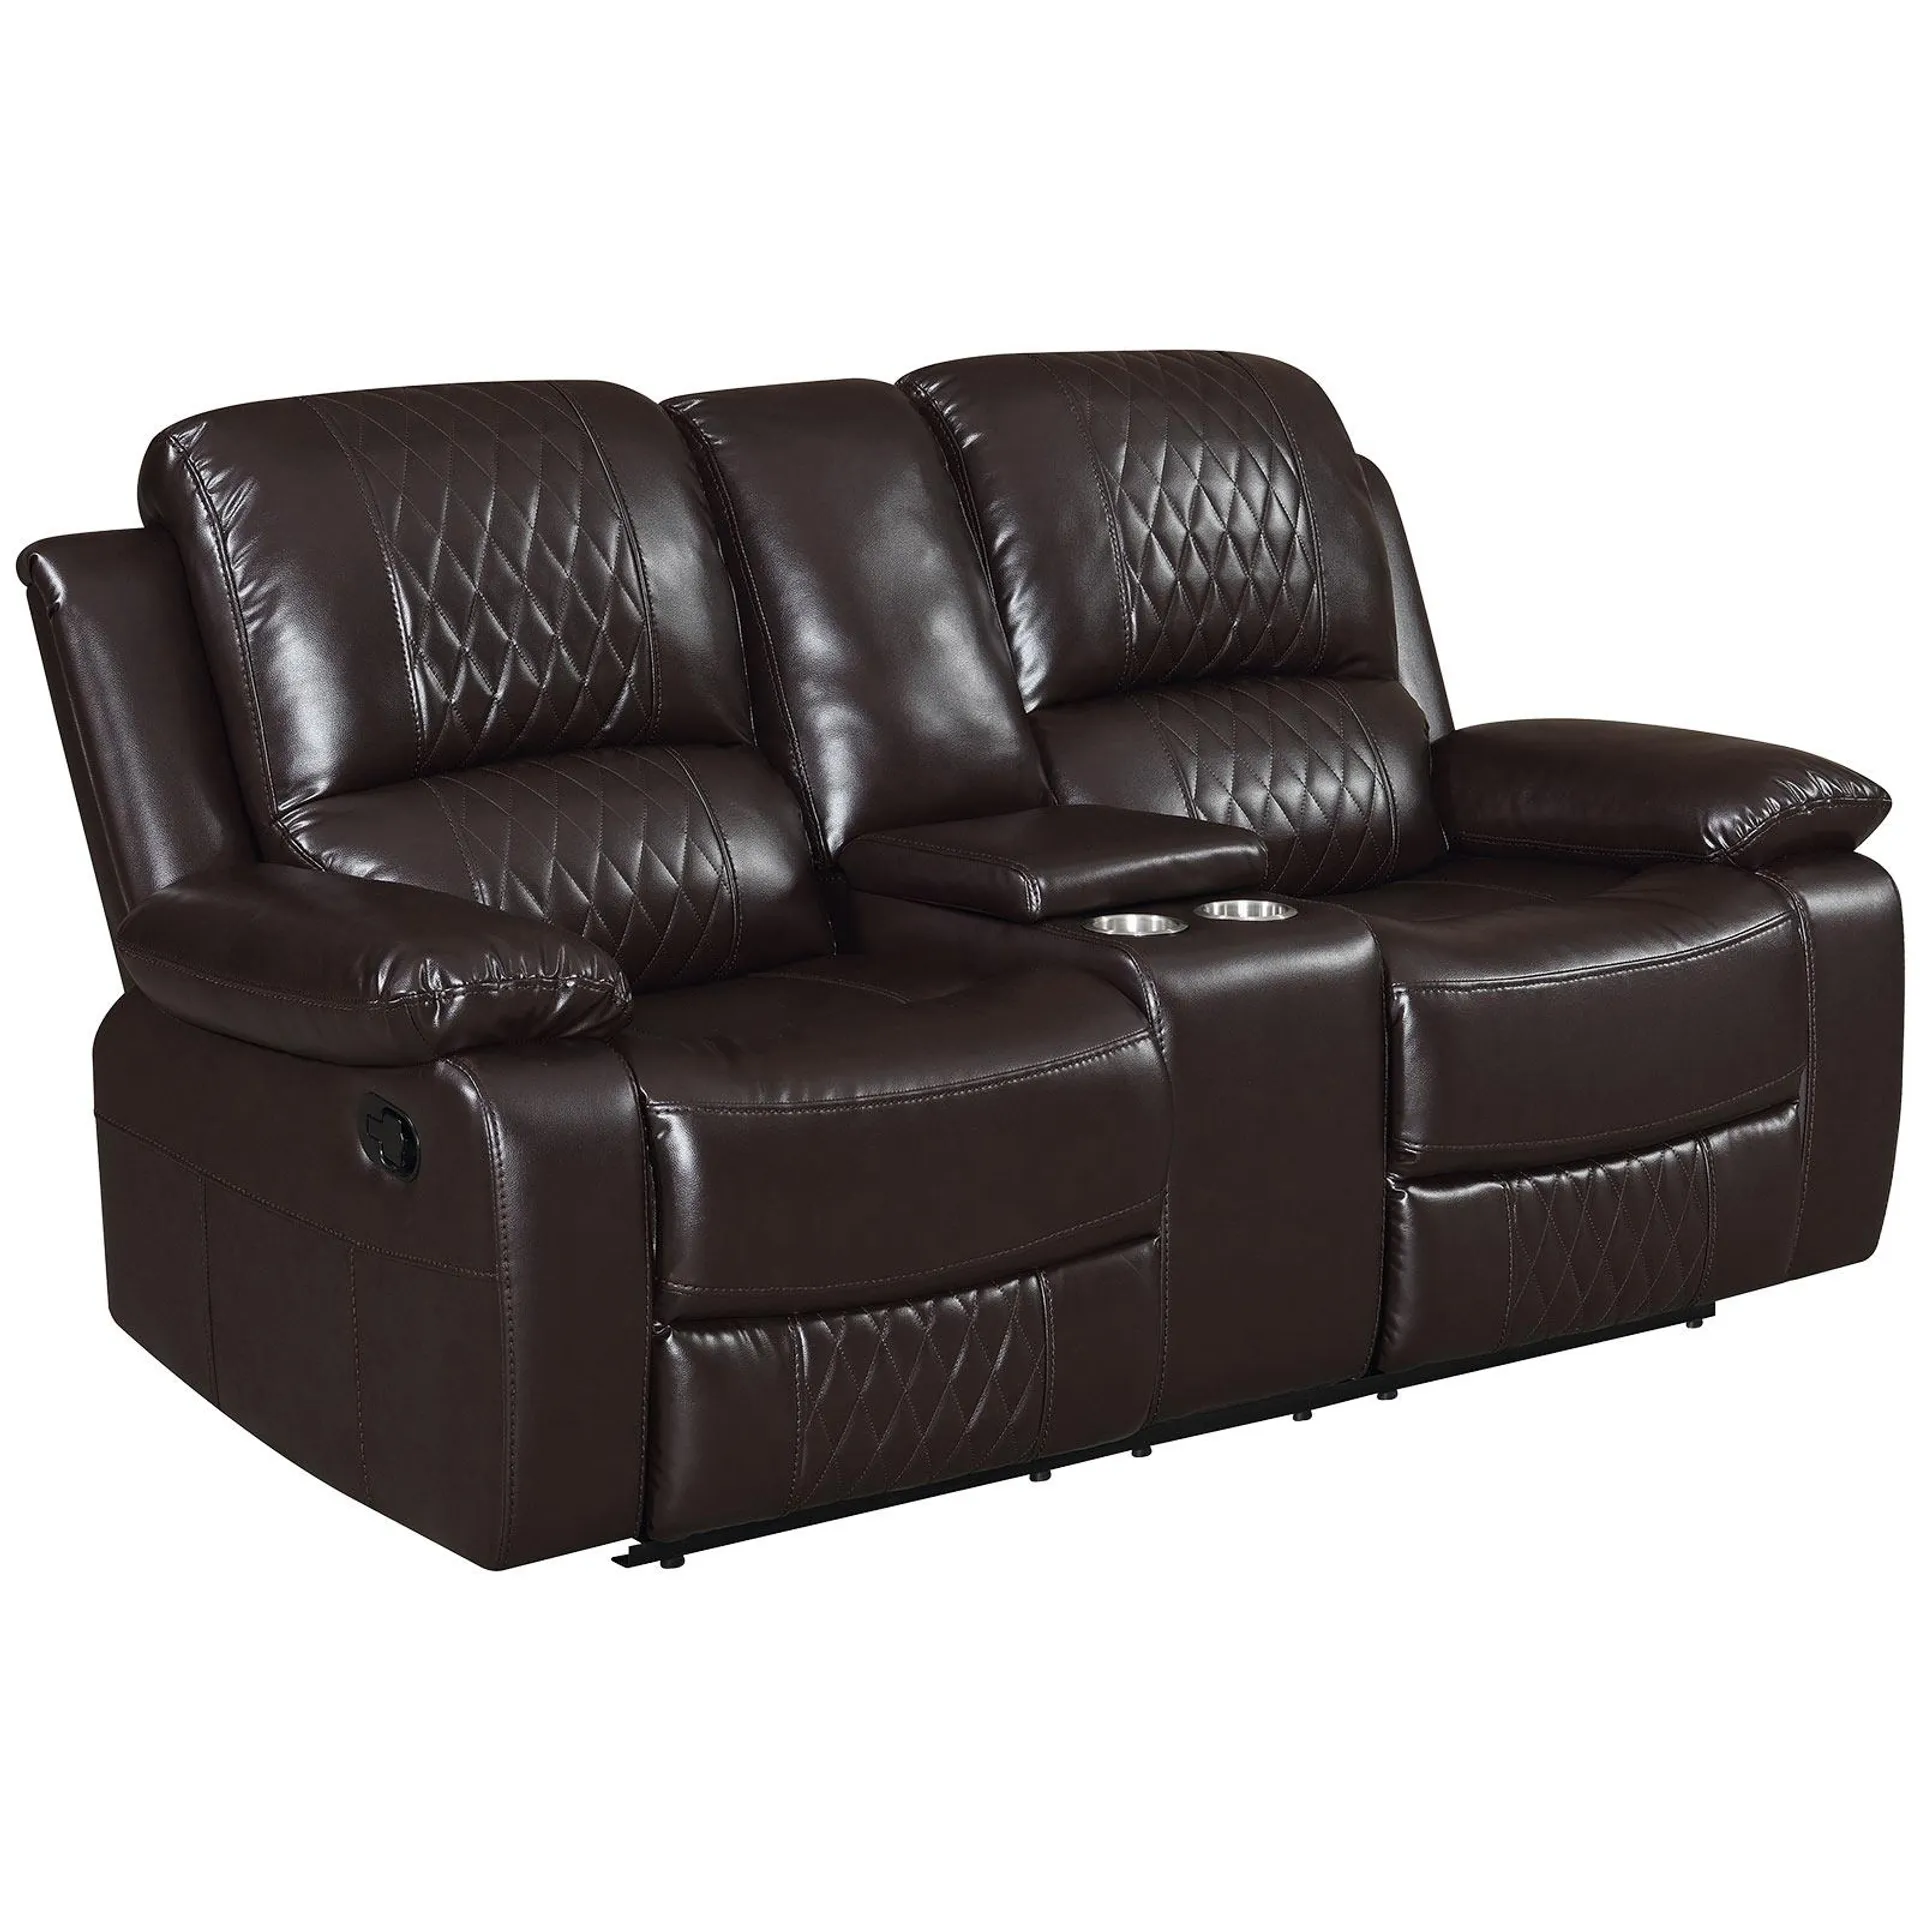 New Classic Furniture Madigan Dual Reclining Loveseat with Console Storage